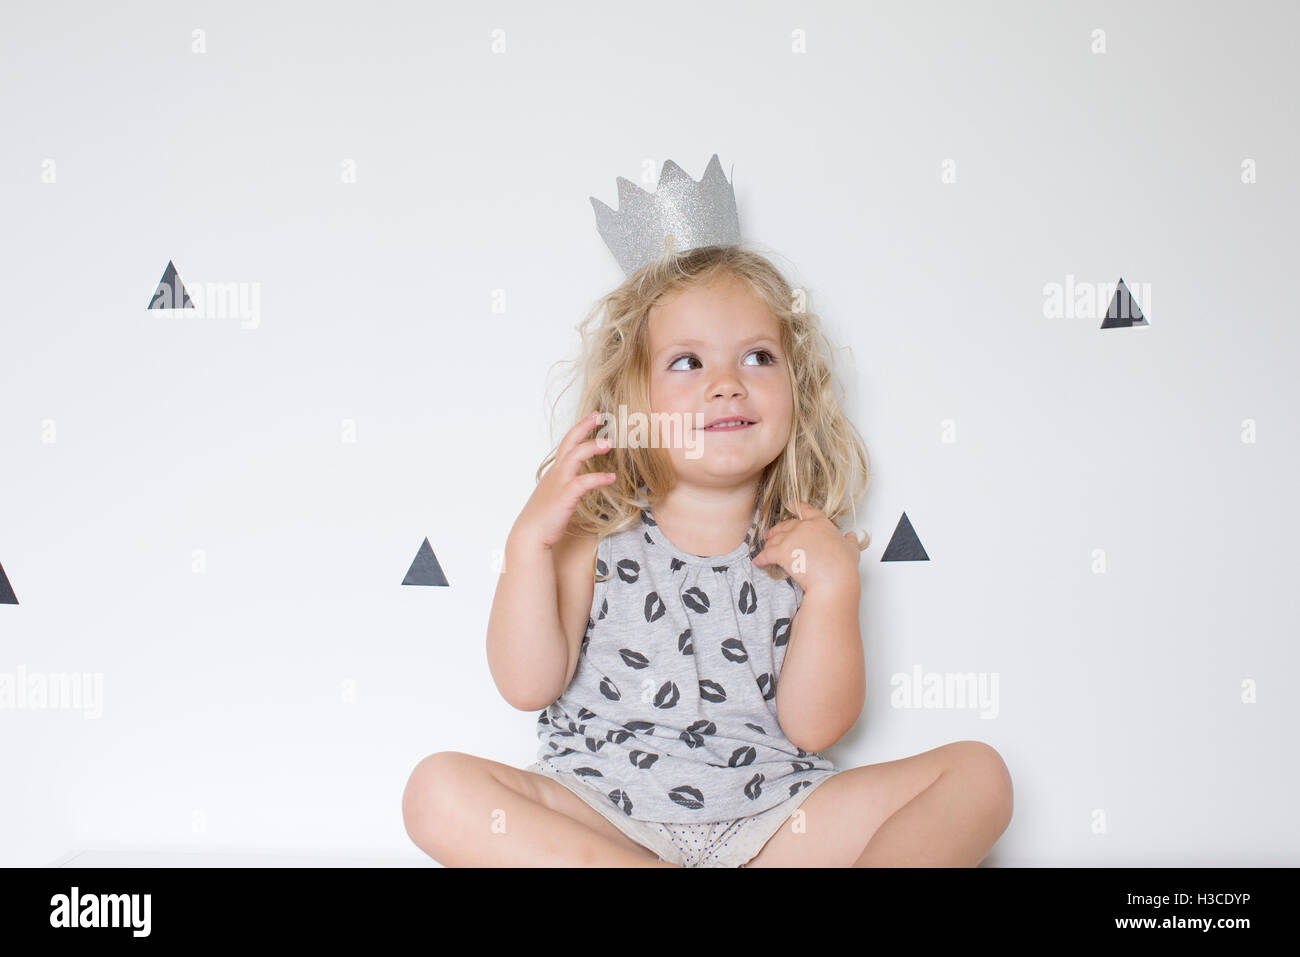 Little girl wearing paper crown Stock Photo